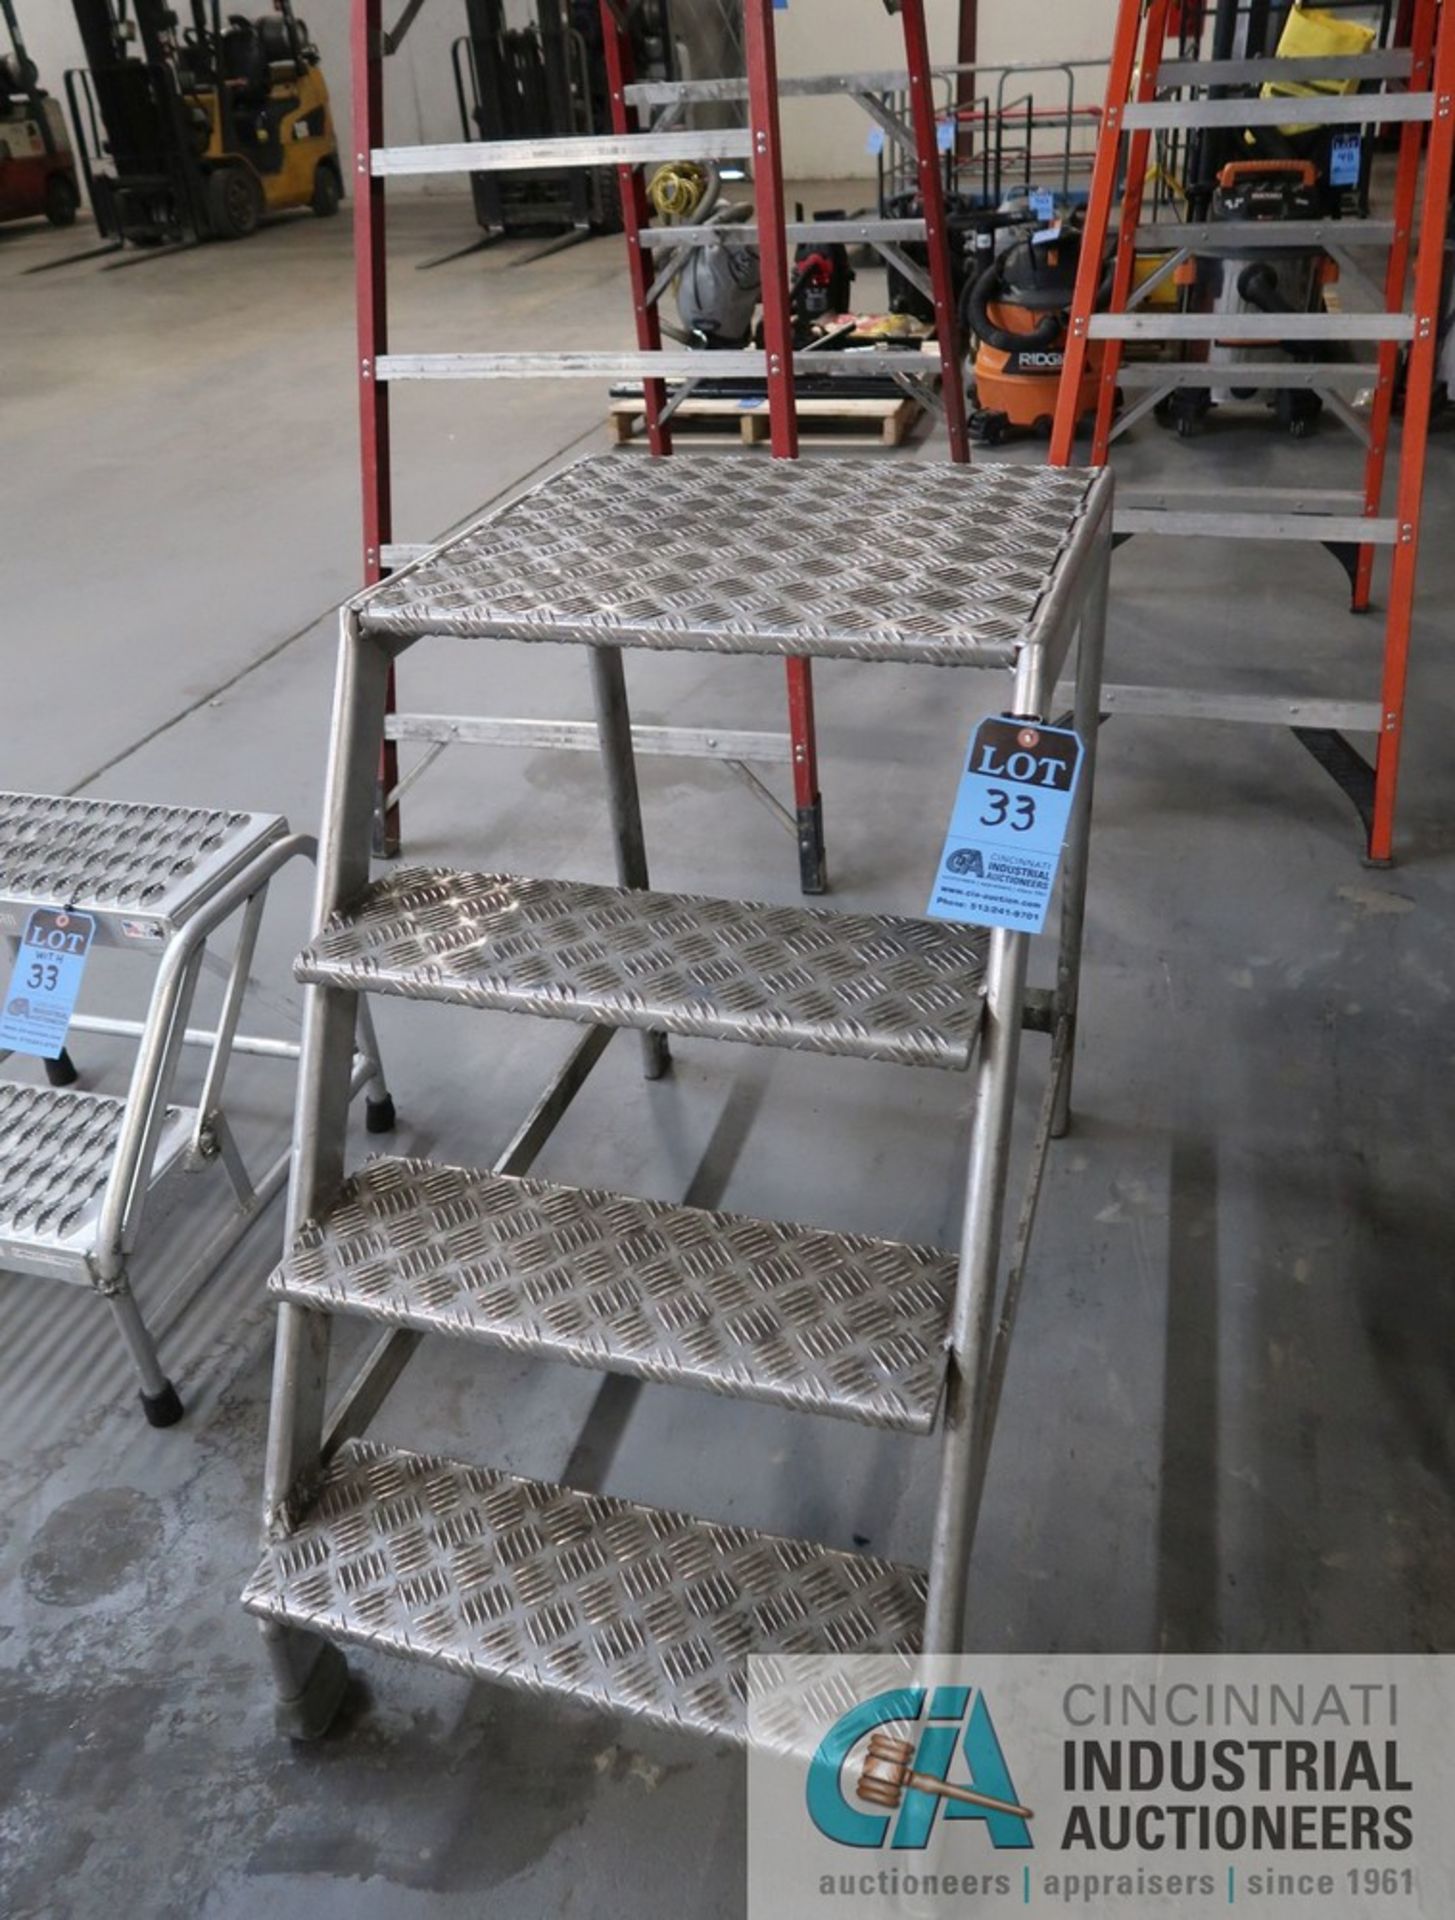 THREE-STEP STATIONARY PLATFORM LADDER AND TWO-STEP COTTERMAN UTILITY STEP